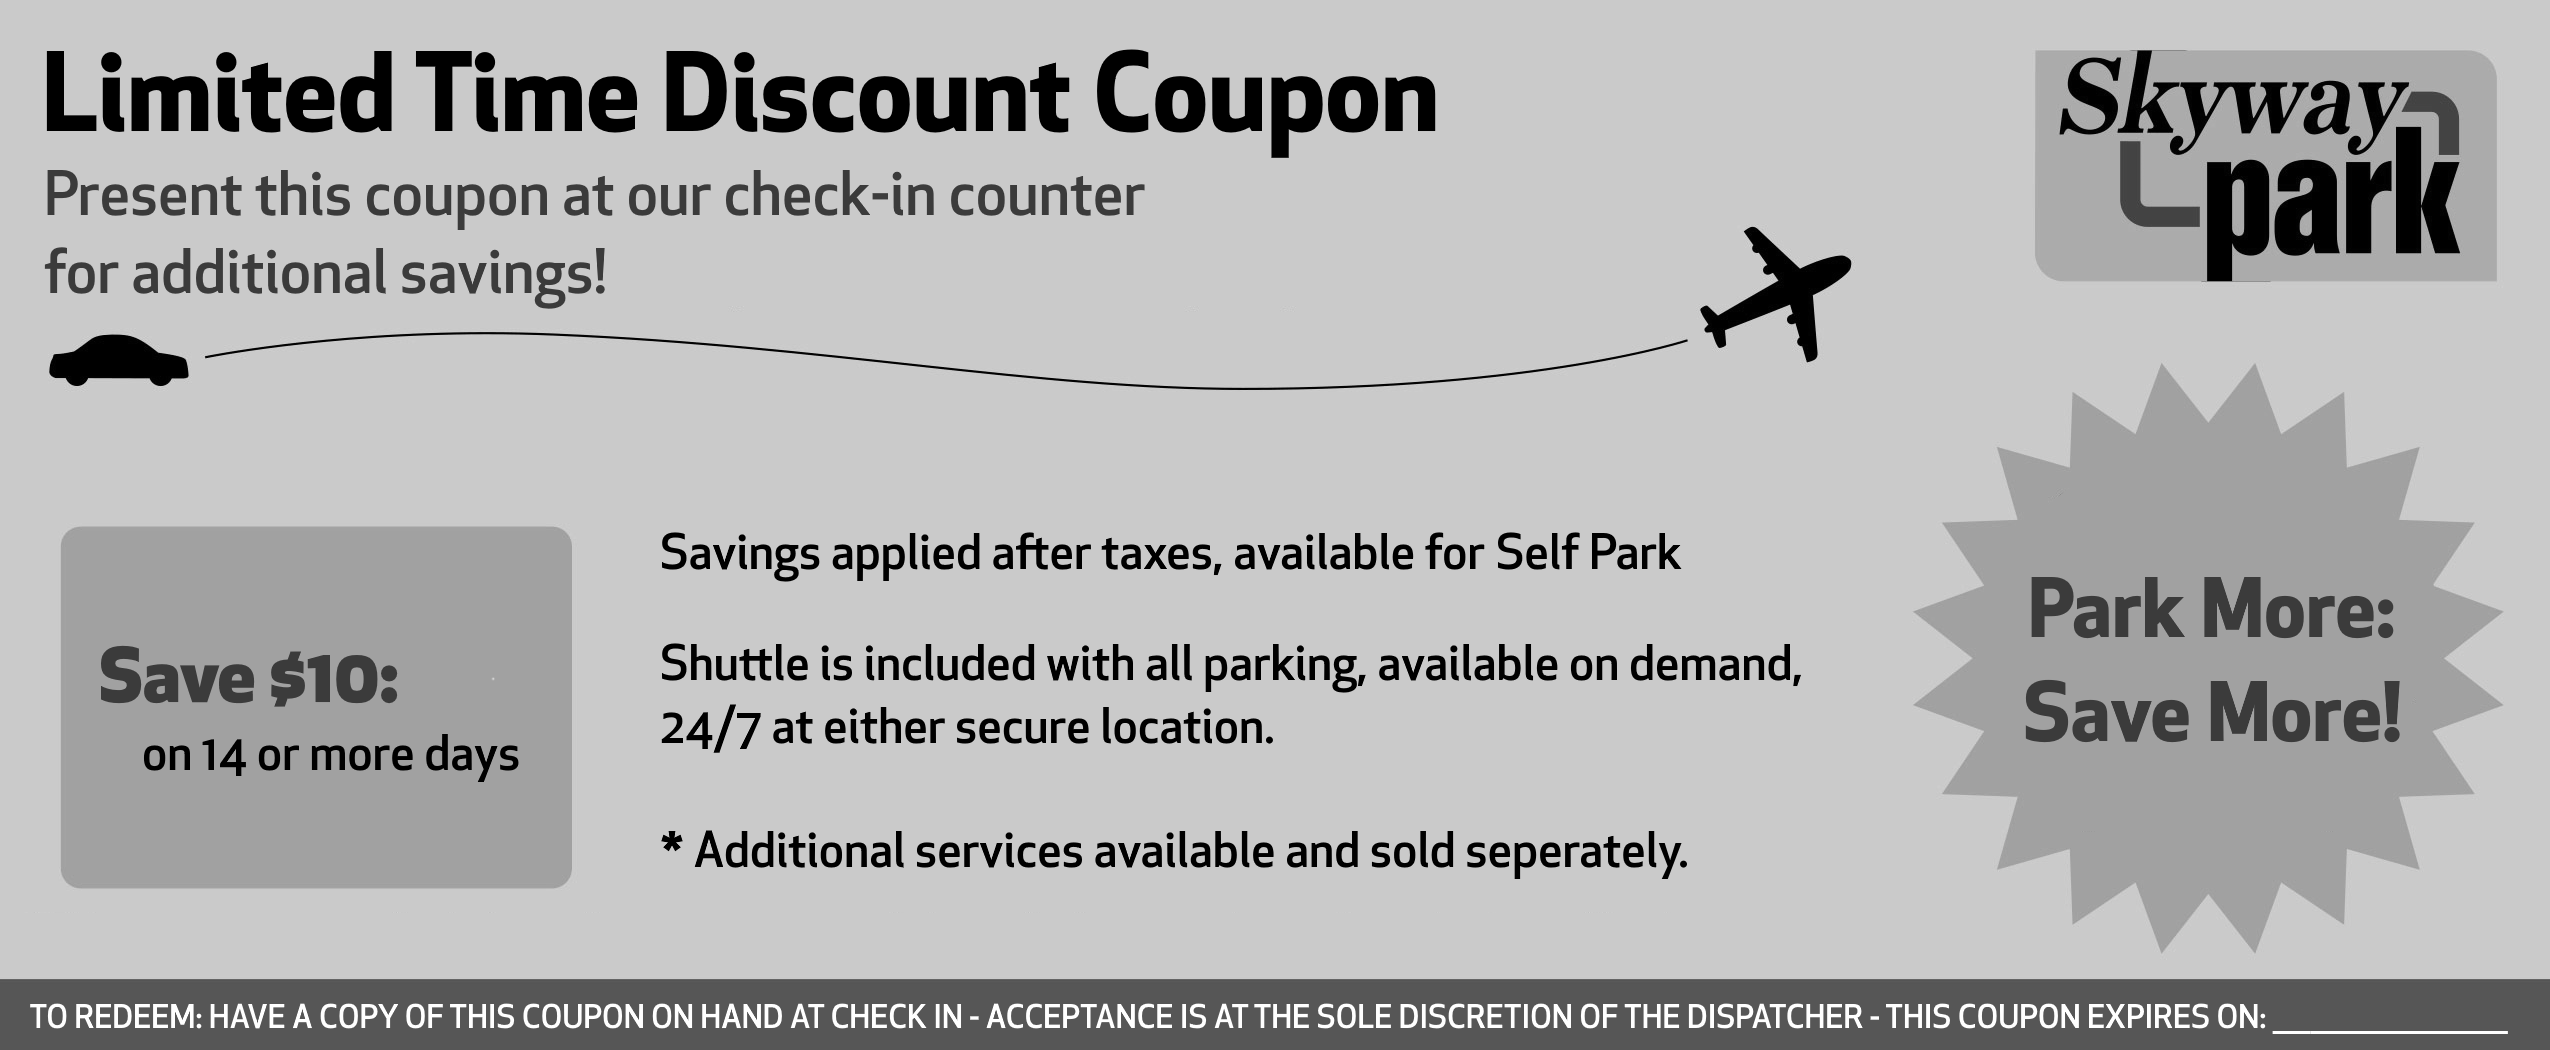 ParkingCoupon Front - Black and White